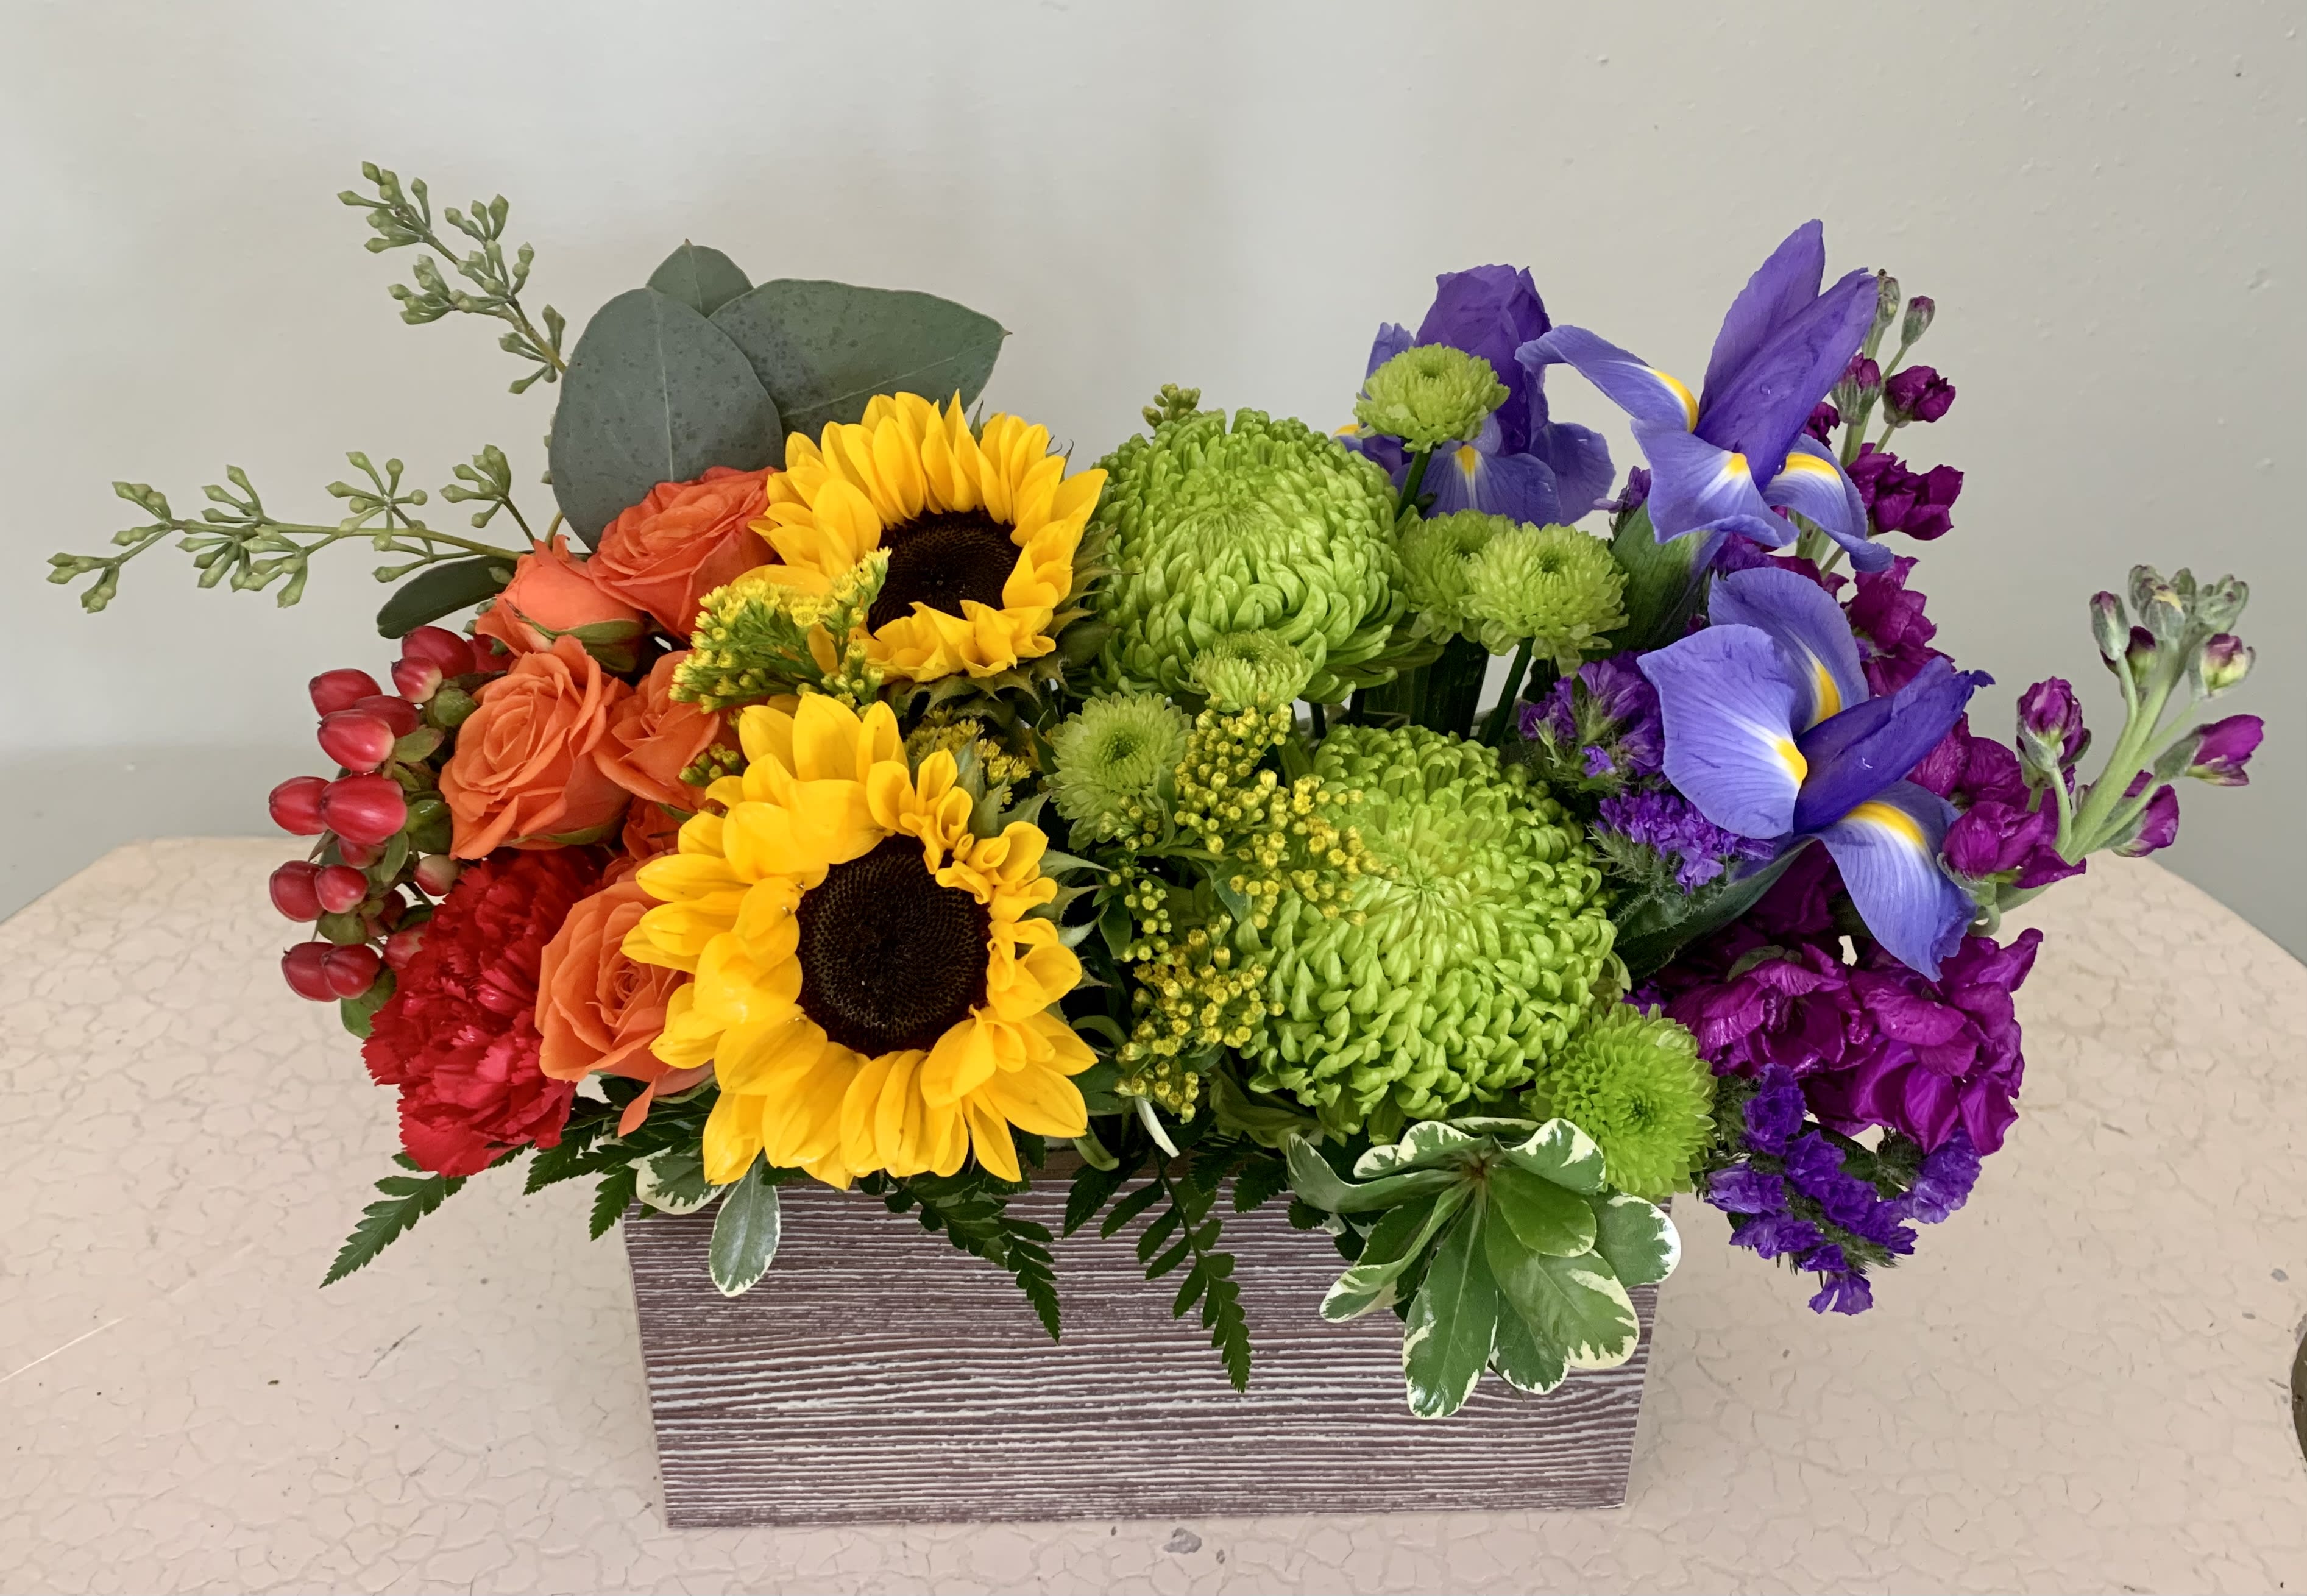 A Twist of Color - A beautiful rainbow of color in a weathered wooden box. A cheerful arrangement for any occasion!